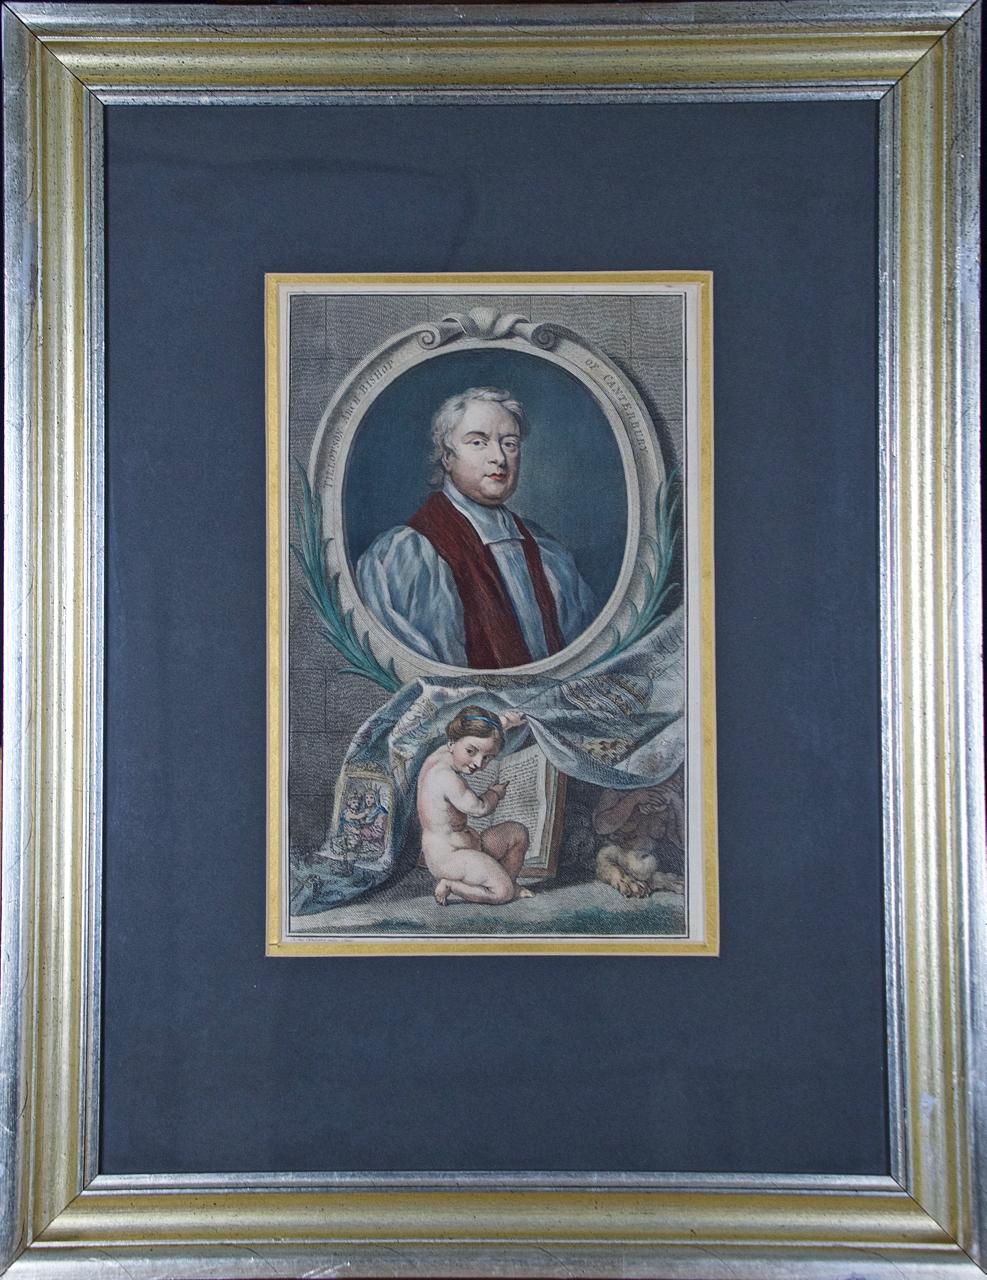 (After) Sir Godfrey Kneller Portrait Print - Tillotson, Archbishop of Canterbury: An 18th C. Hand-Colored Portrait by Kneller